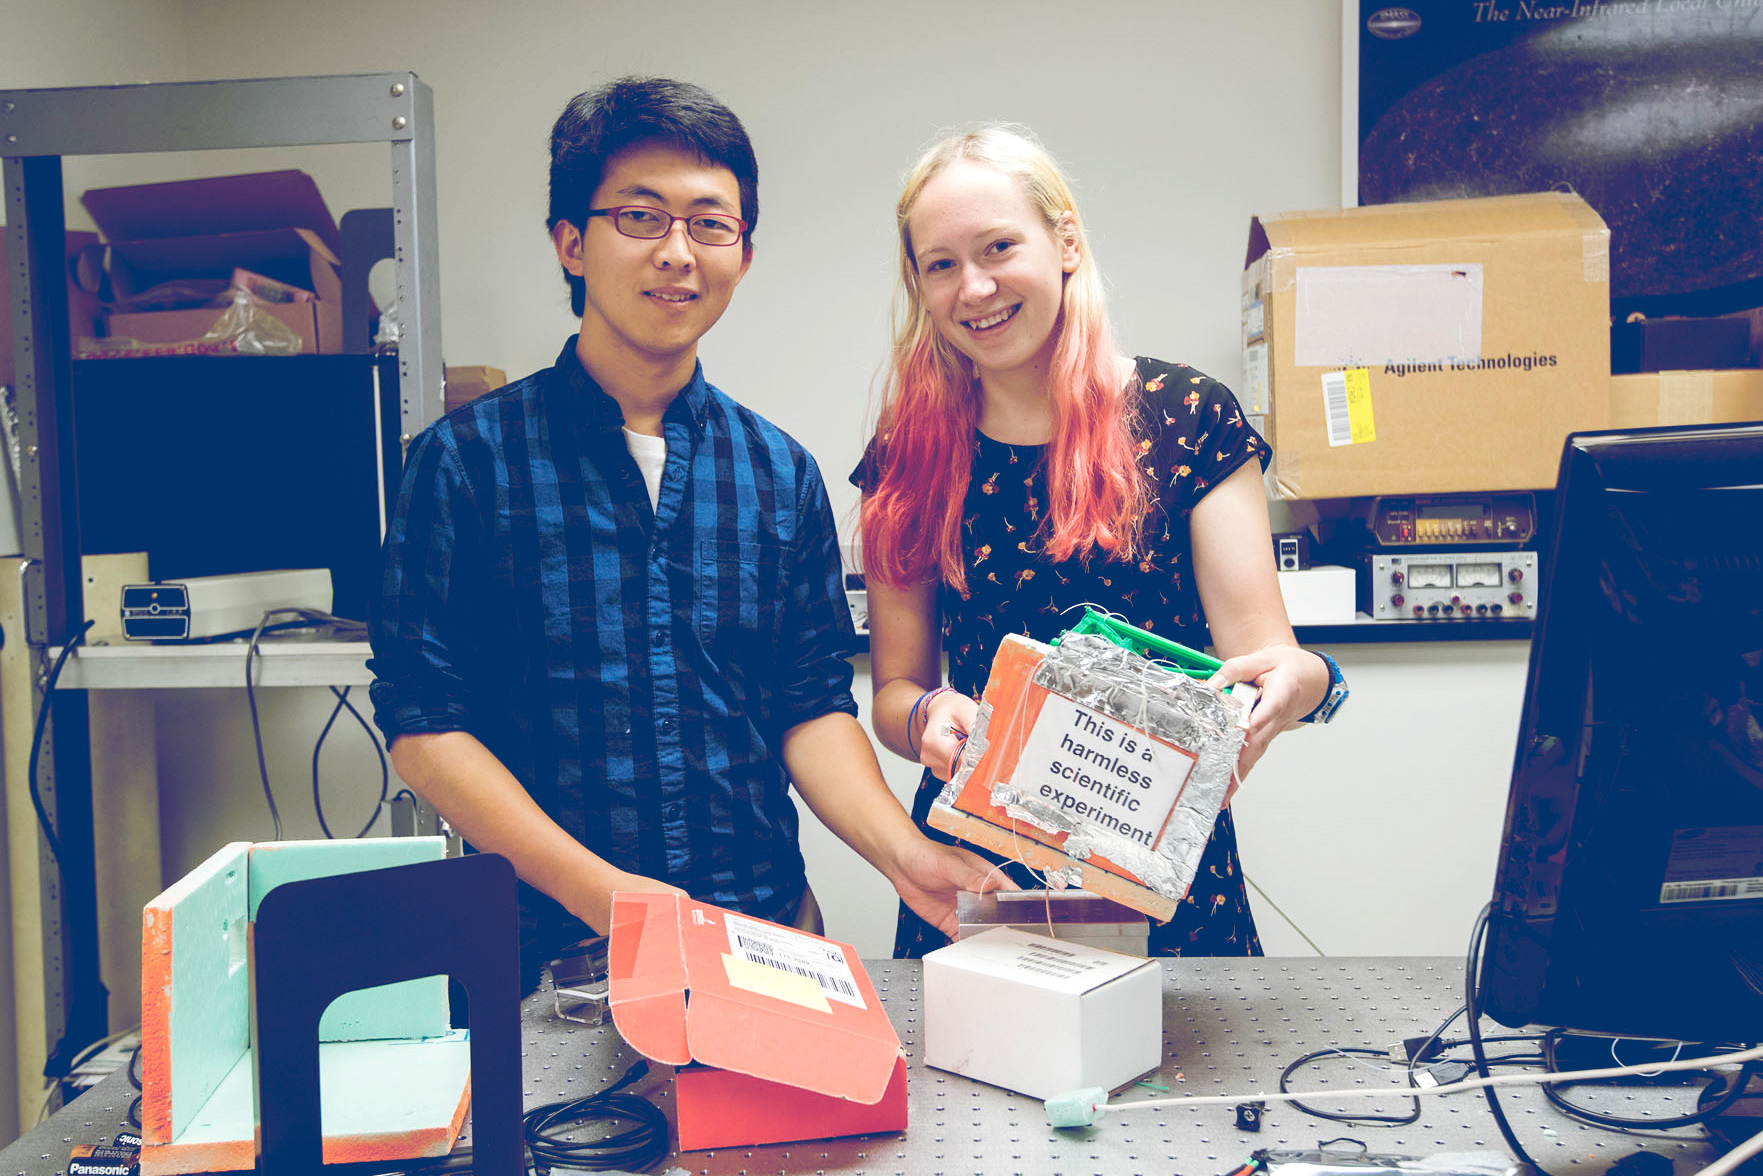 HeeSeok Joo, left, and Chloe Downs worked with physics student Nina Mazzarelli to design, build and fly an astronomy-related payload on a weather balloon. (Photo by Dan Addison, University Communications)